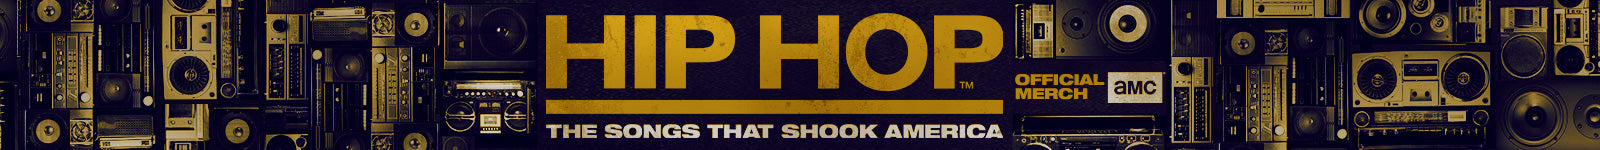 Hip Hop The Songs That Shook America banner